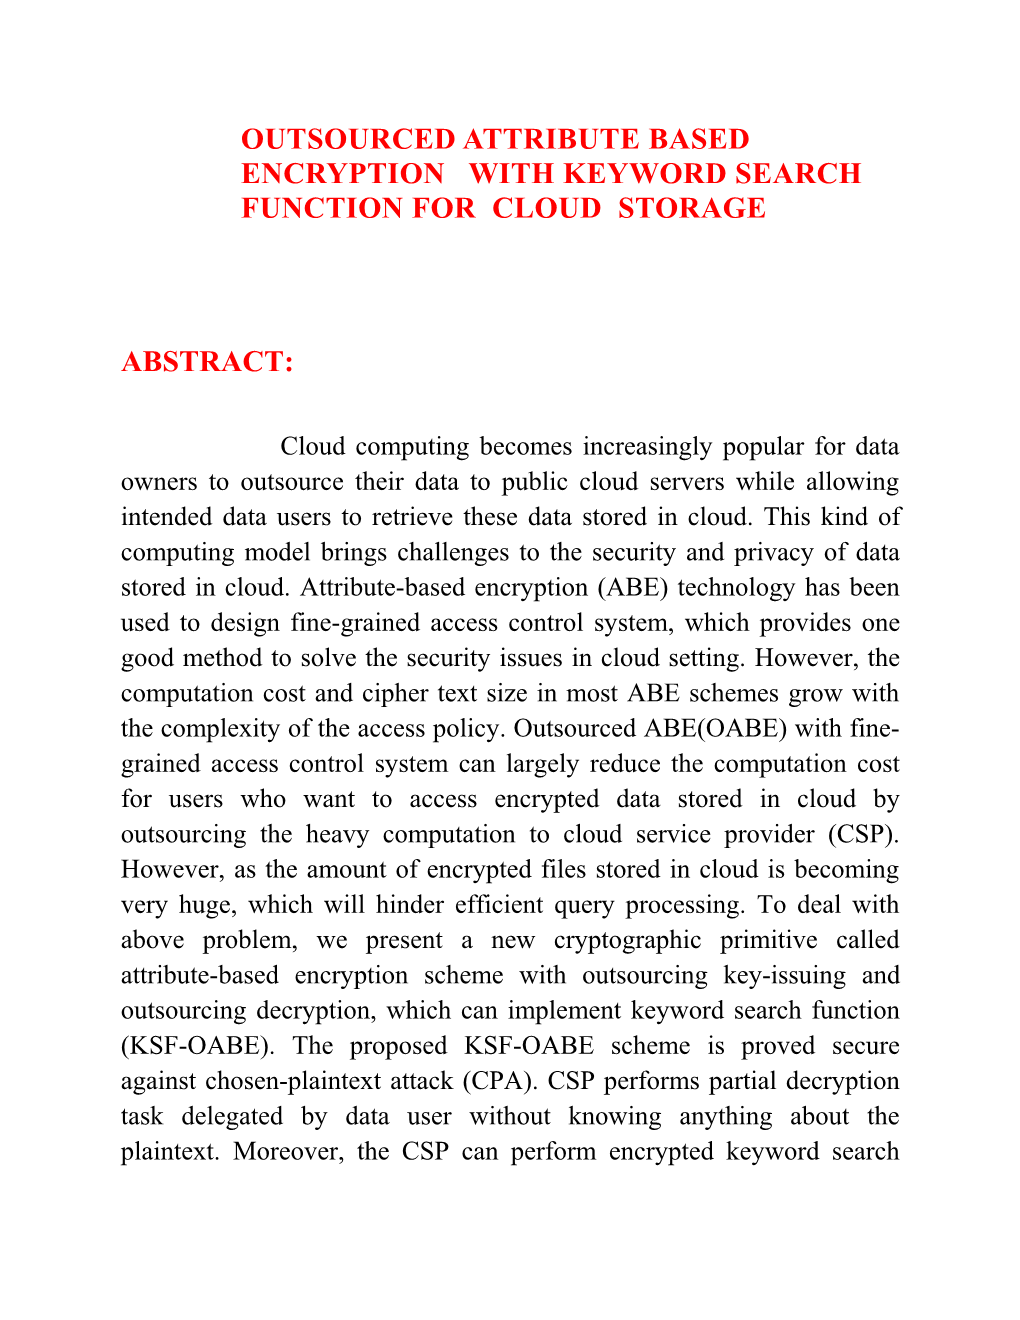 Outsourced Attribute Based Encryption with Keyword Search Function for Cloud Storage